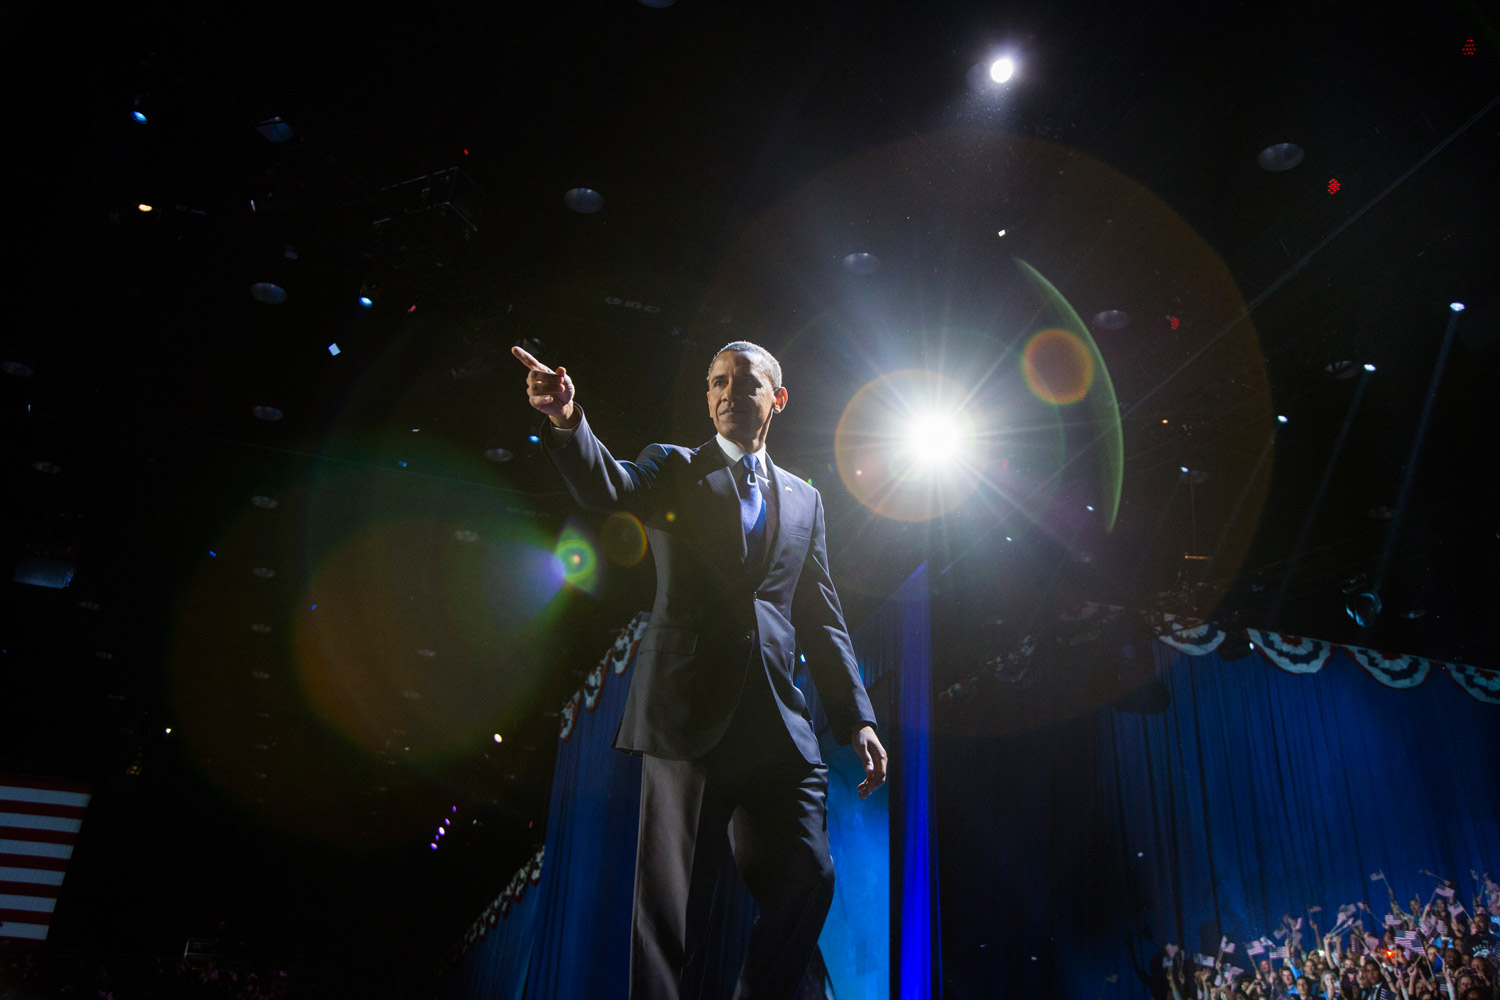 Nov. 6, 2012. President Barack Obama points to someone in the crowd at his election night victory party in Chicago.